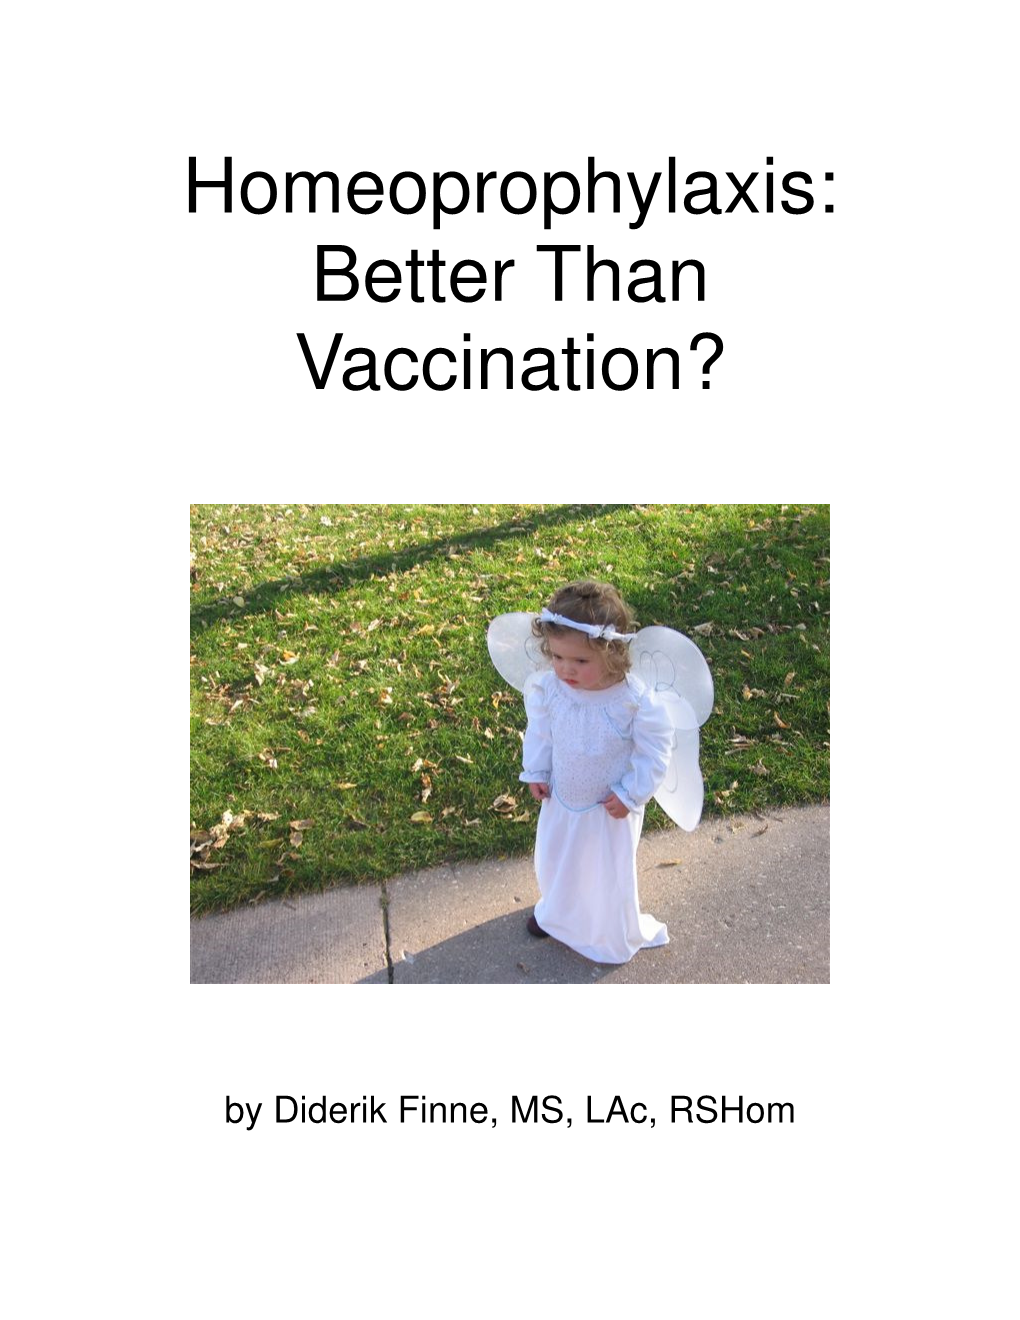 Homeoprophylaxis: Better Than Vaccination?